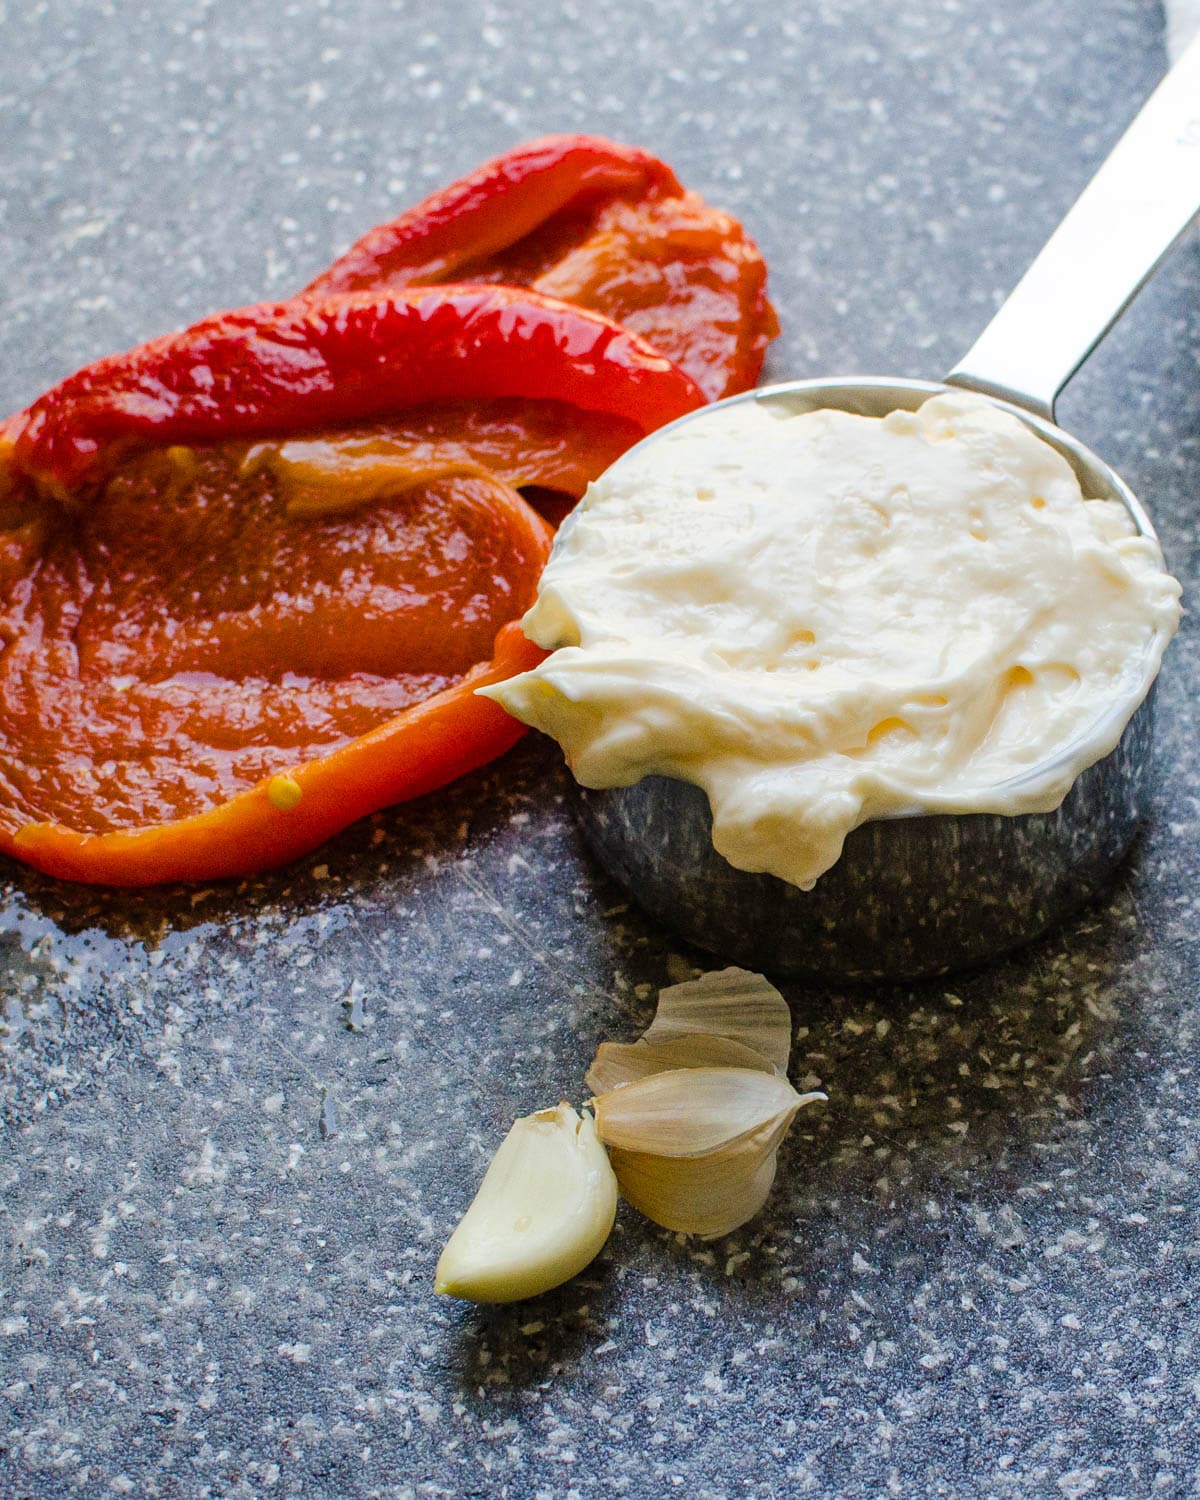 roasted red peppers with mayo and garlic.